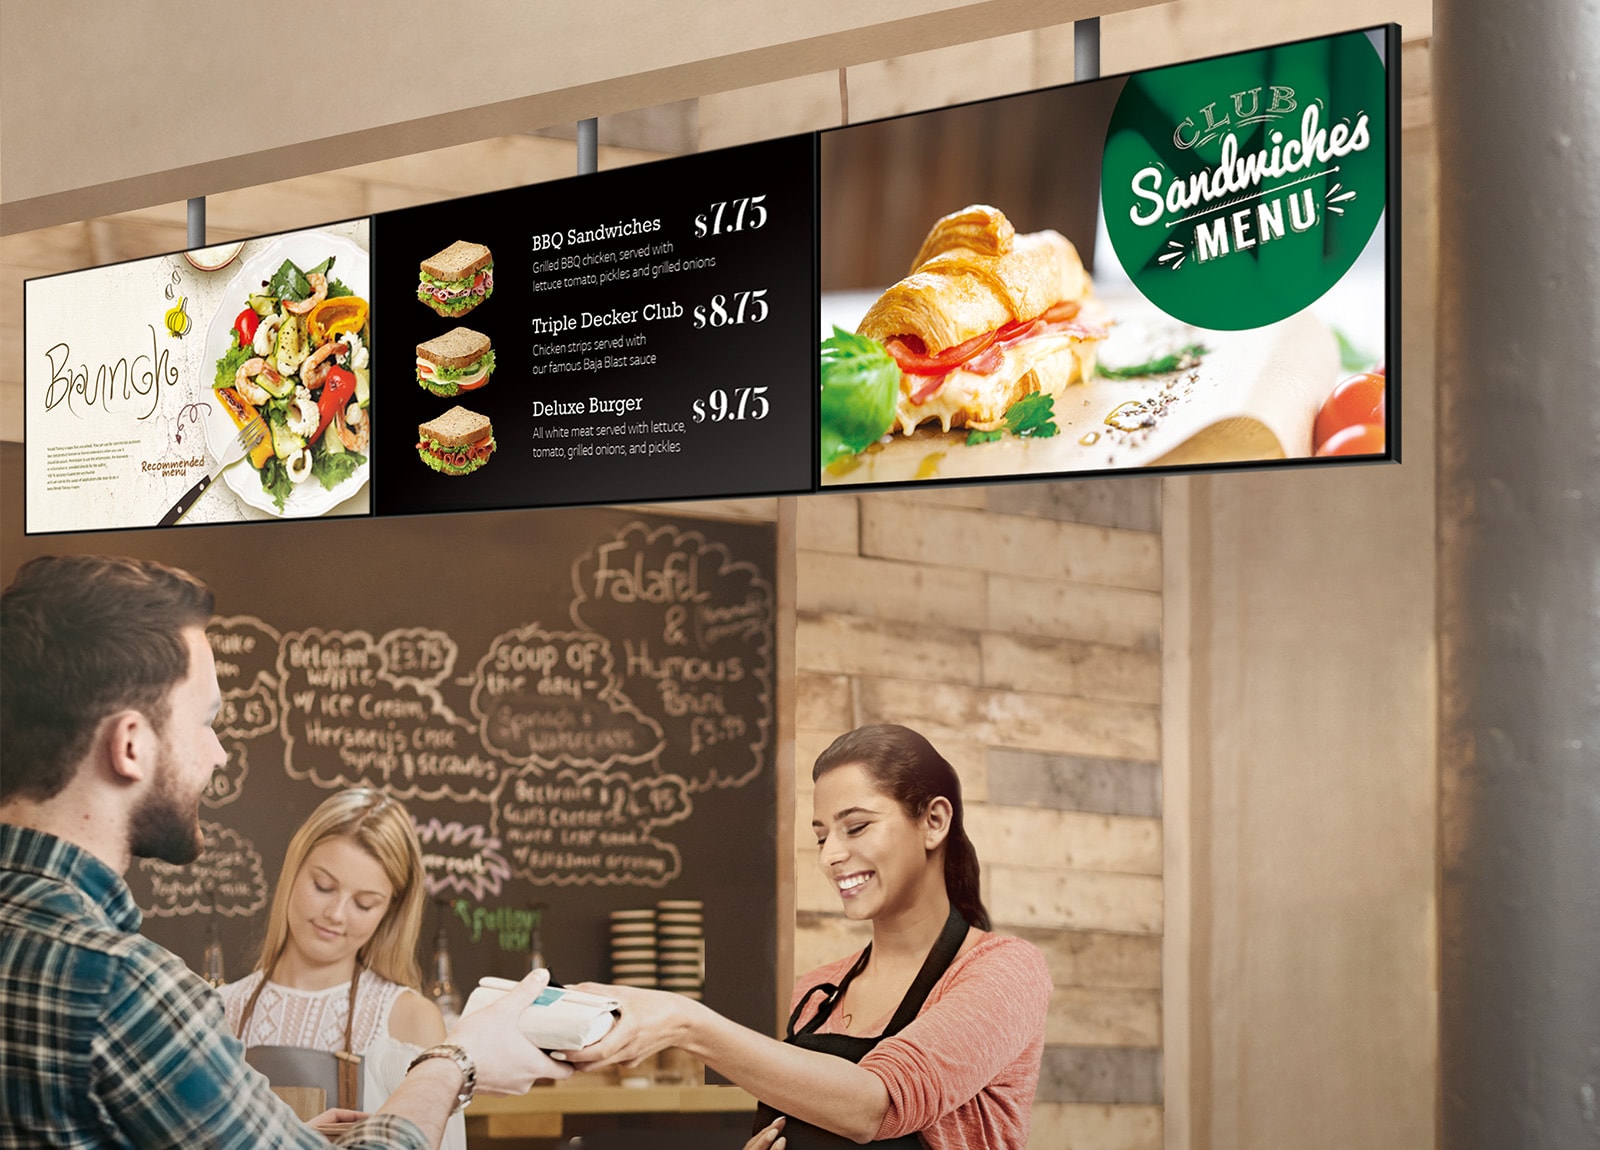 The staff in a sandwich store is handing a sandwich to a customer. The SM5J series showing a menu board is installed above them, displaying sandwich menus with brunch promotions.